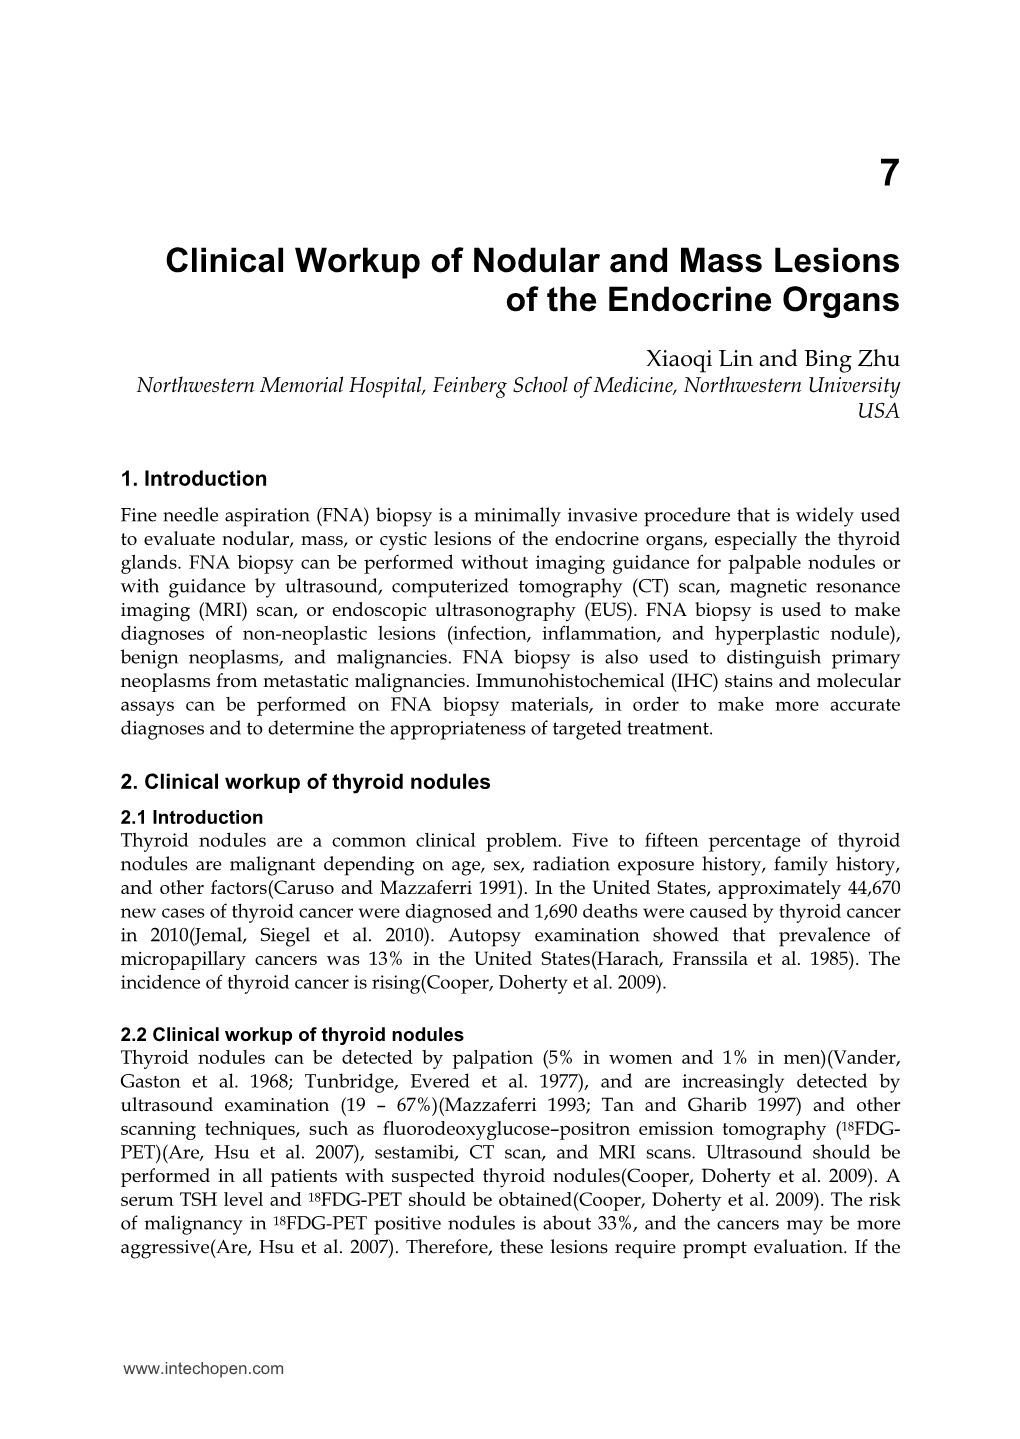 Clinical Workup of Nodular and Mass Lesions of the Endocrine Organs